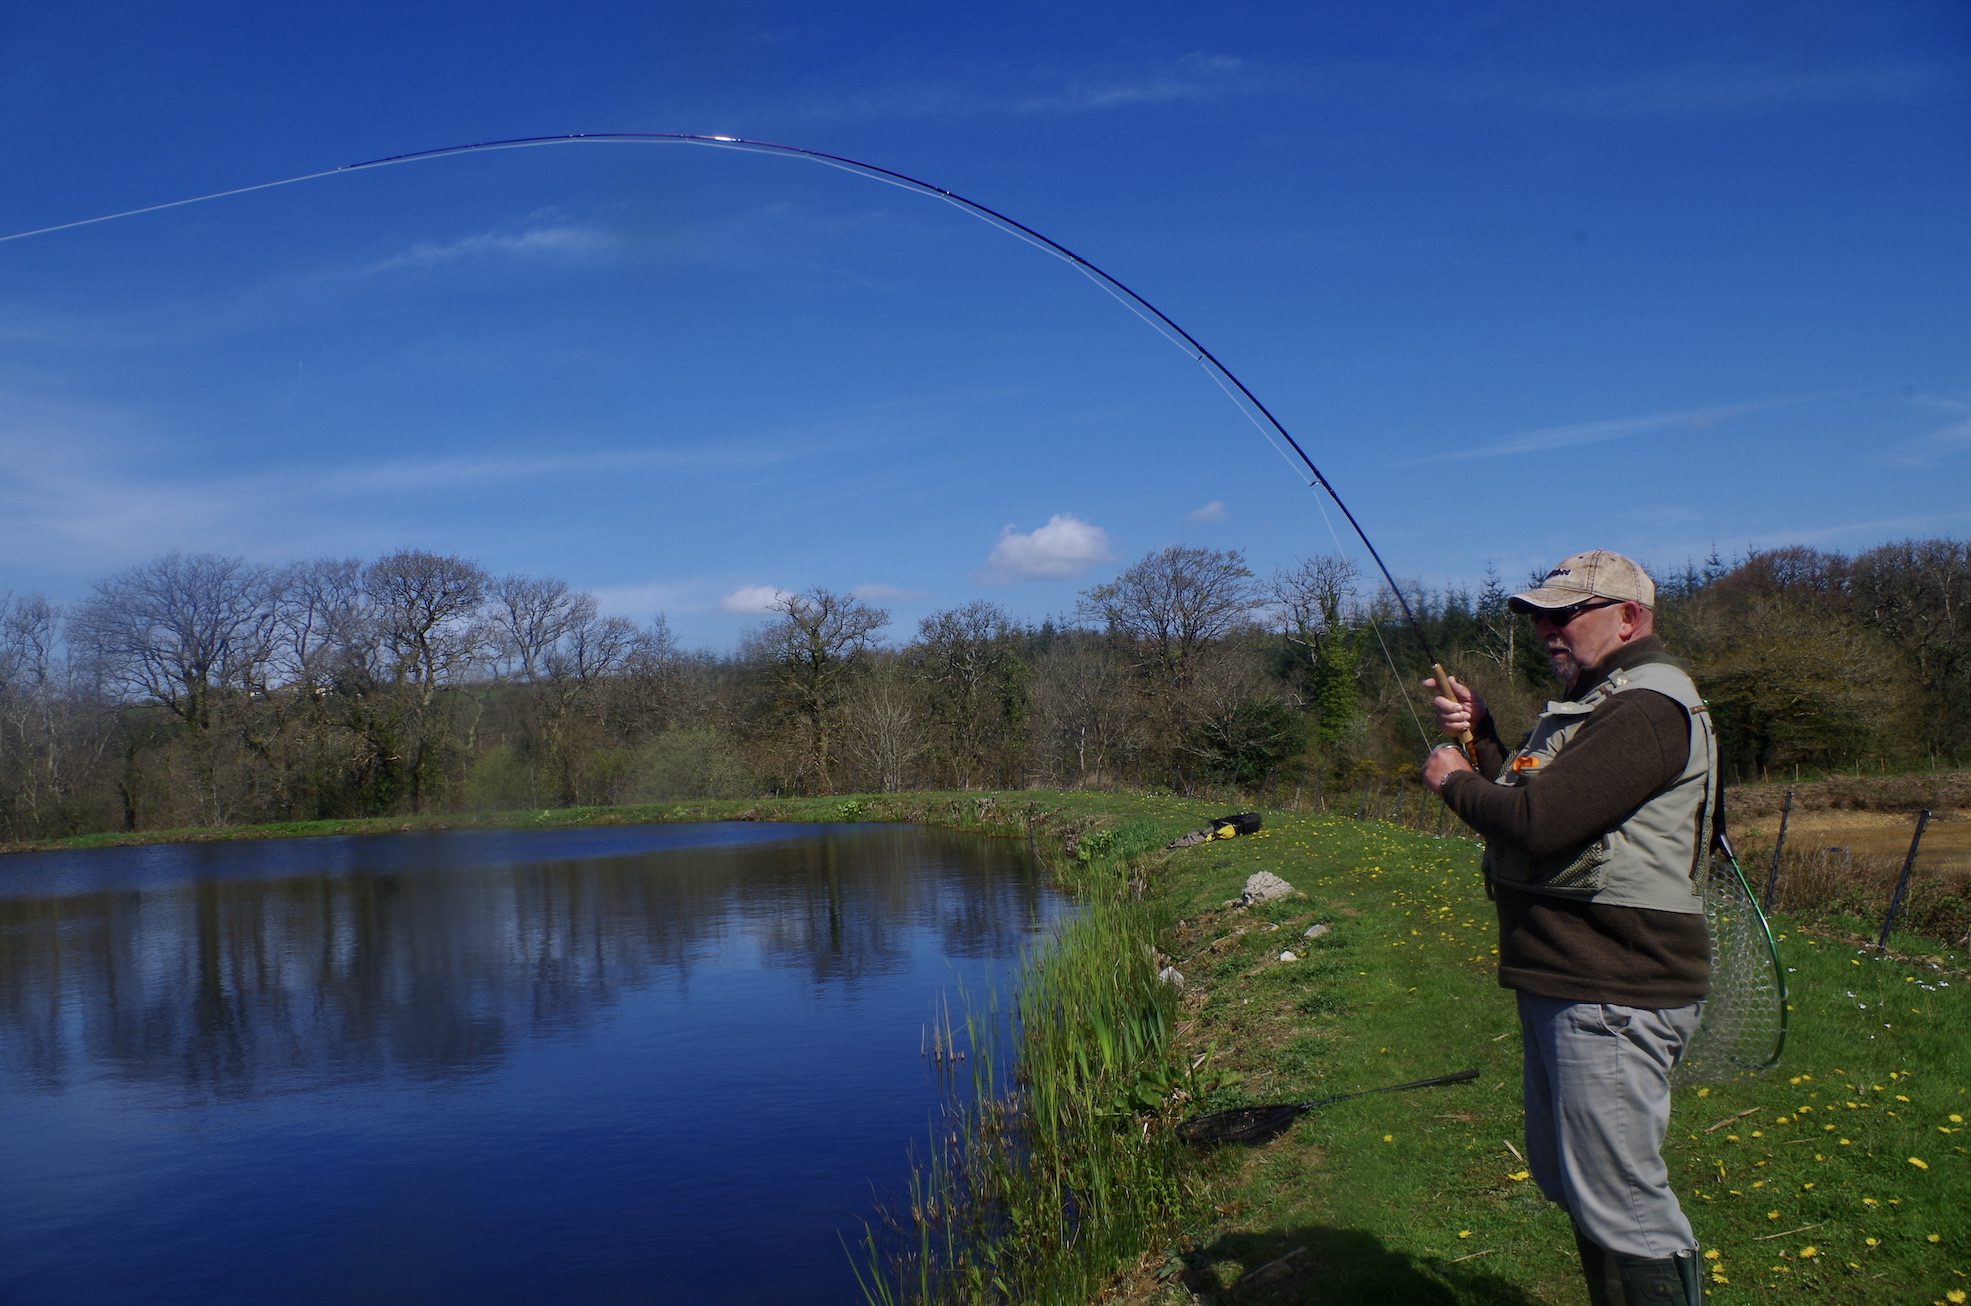 Snowbee Archives - North Devon & Exmoor Angling News - The latest